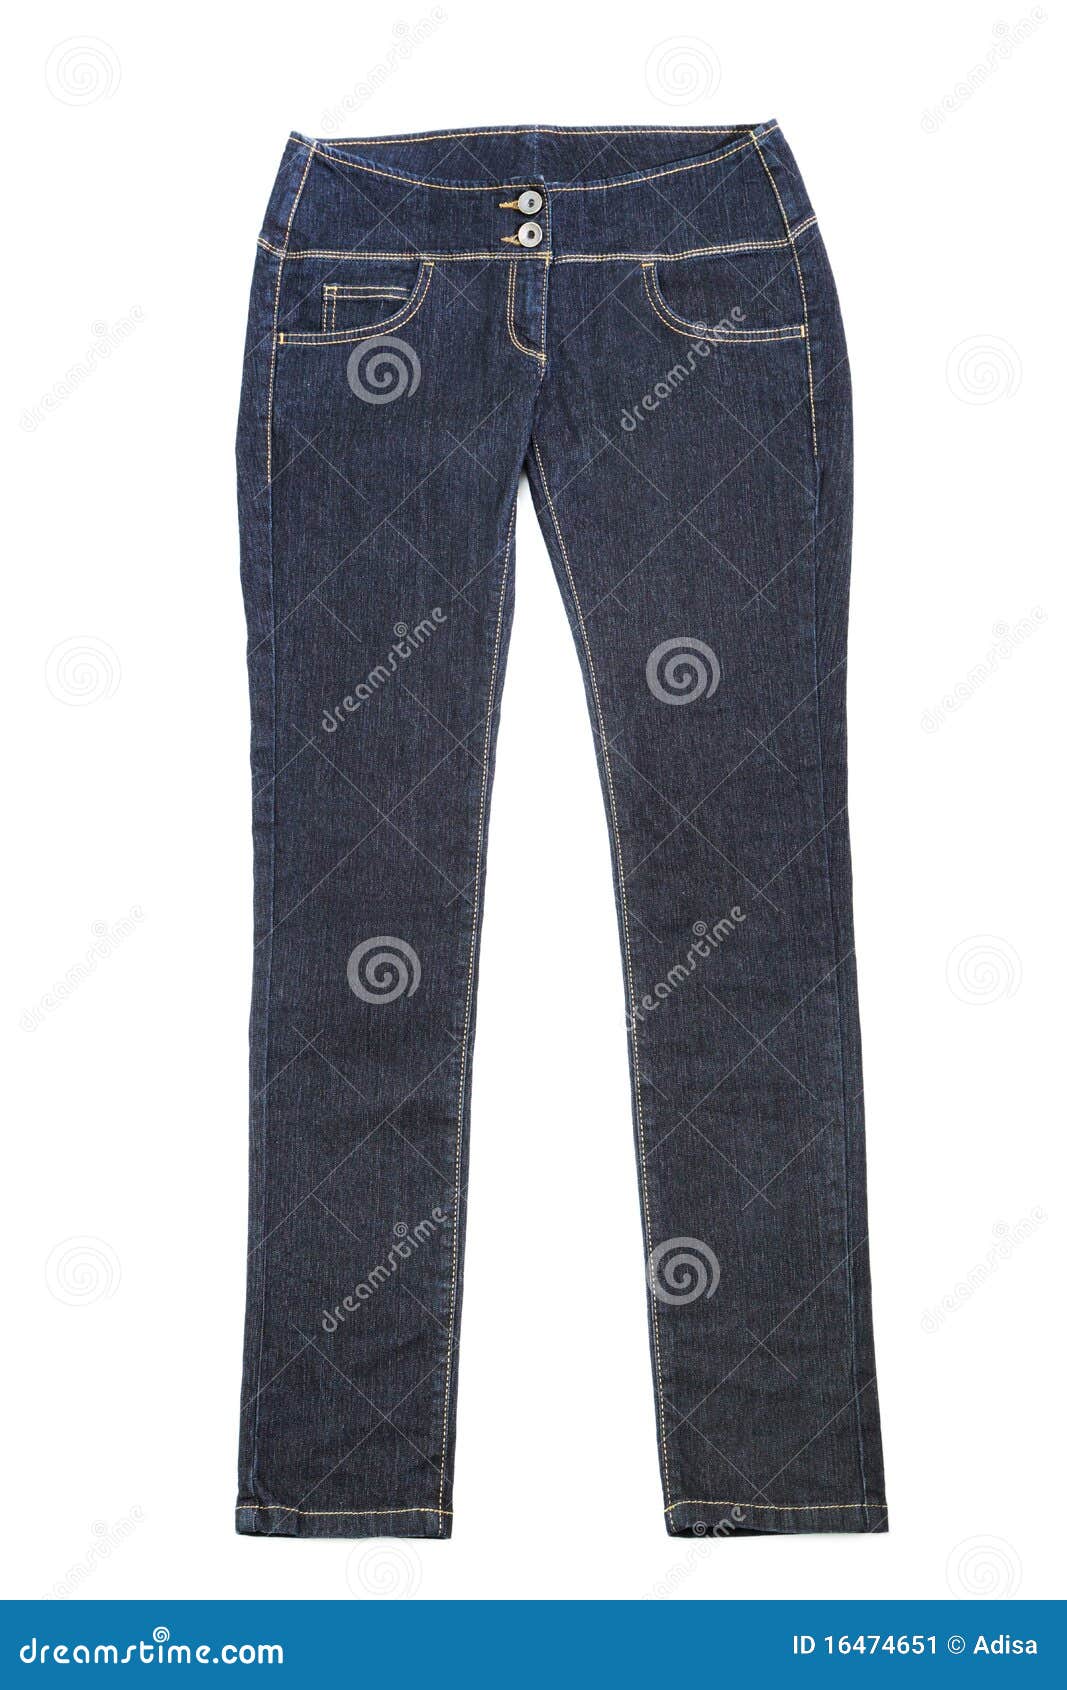 Jeans stock image. Image of style, object, apparel, garment - 16474651